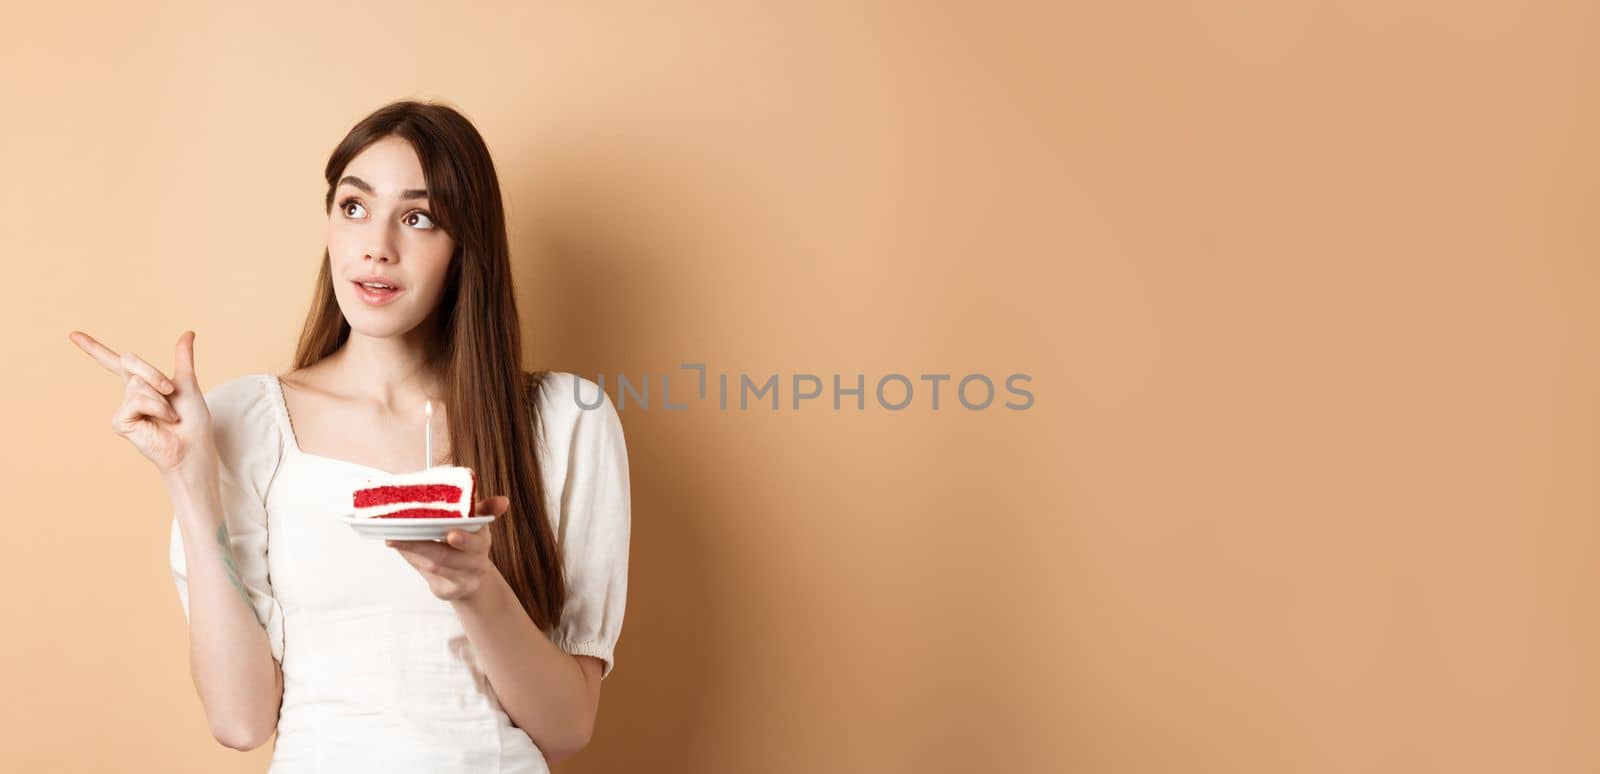 Thoughtful birthday girl holding cake with candle, thinking of wish and pointing left at logo, standing on beige background.